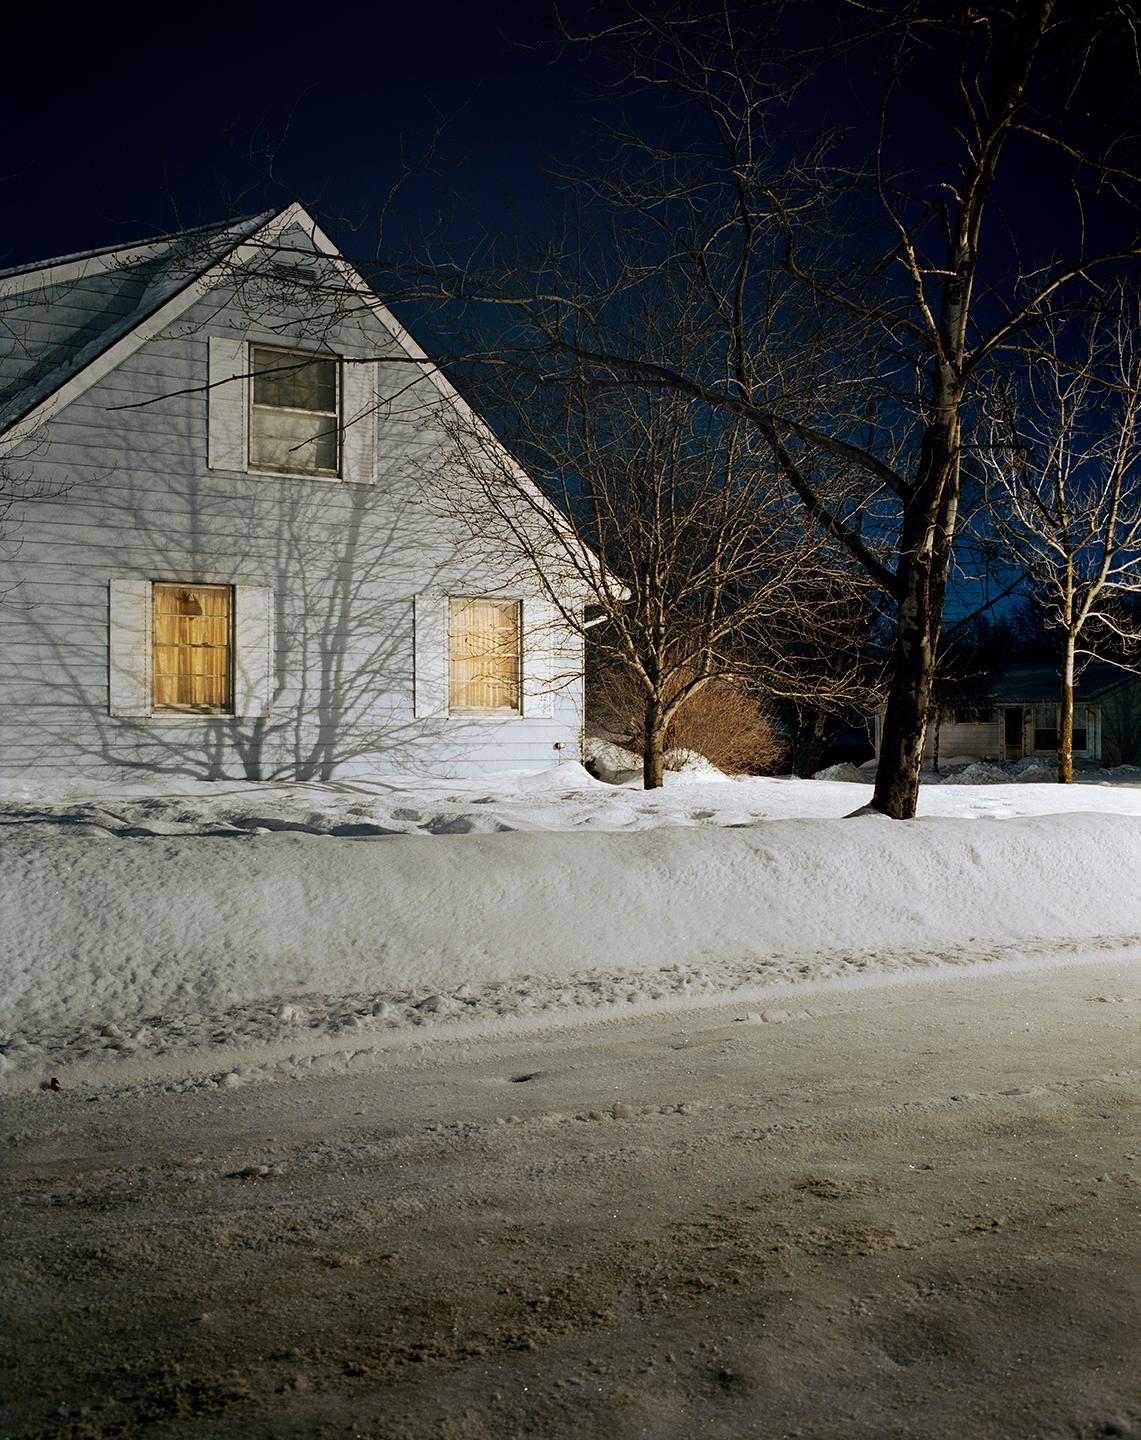 #2421 - Todd Hido (Colour Photography)
Signed, titled and dated on reverse
Archival pigment print

Available in three sizes:
24 x 20 inches, from an edition of 10 + 3 APs
38 x 30 inches, from an edition of 5 + 2 APs
48 x 38 inches, from an edition